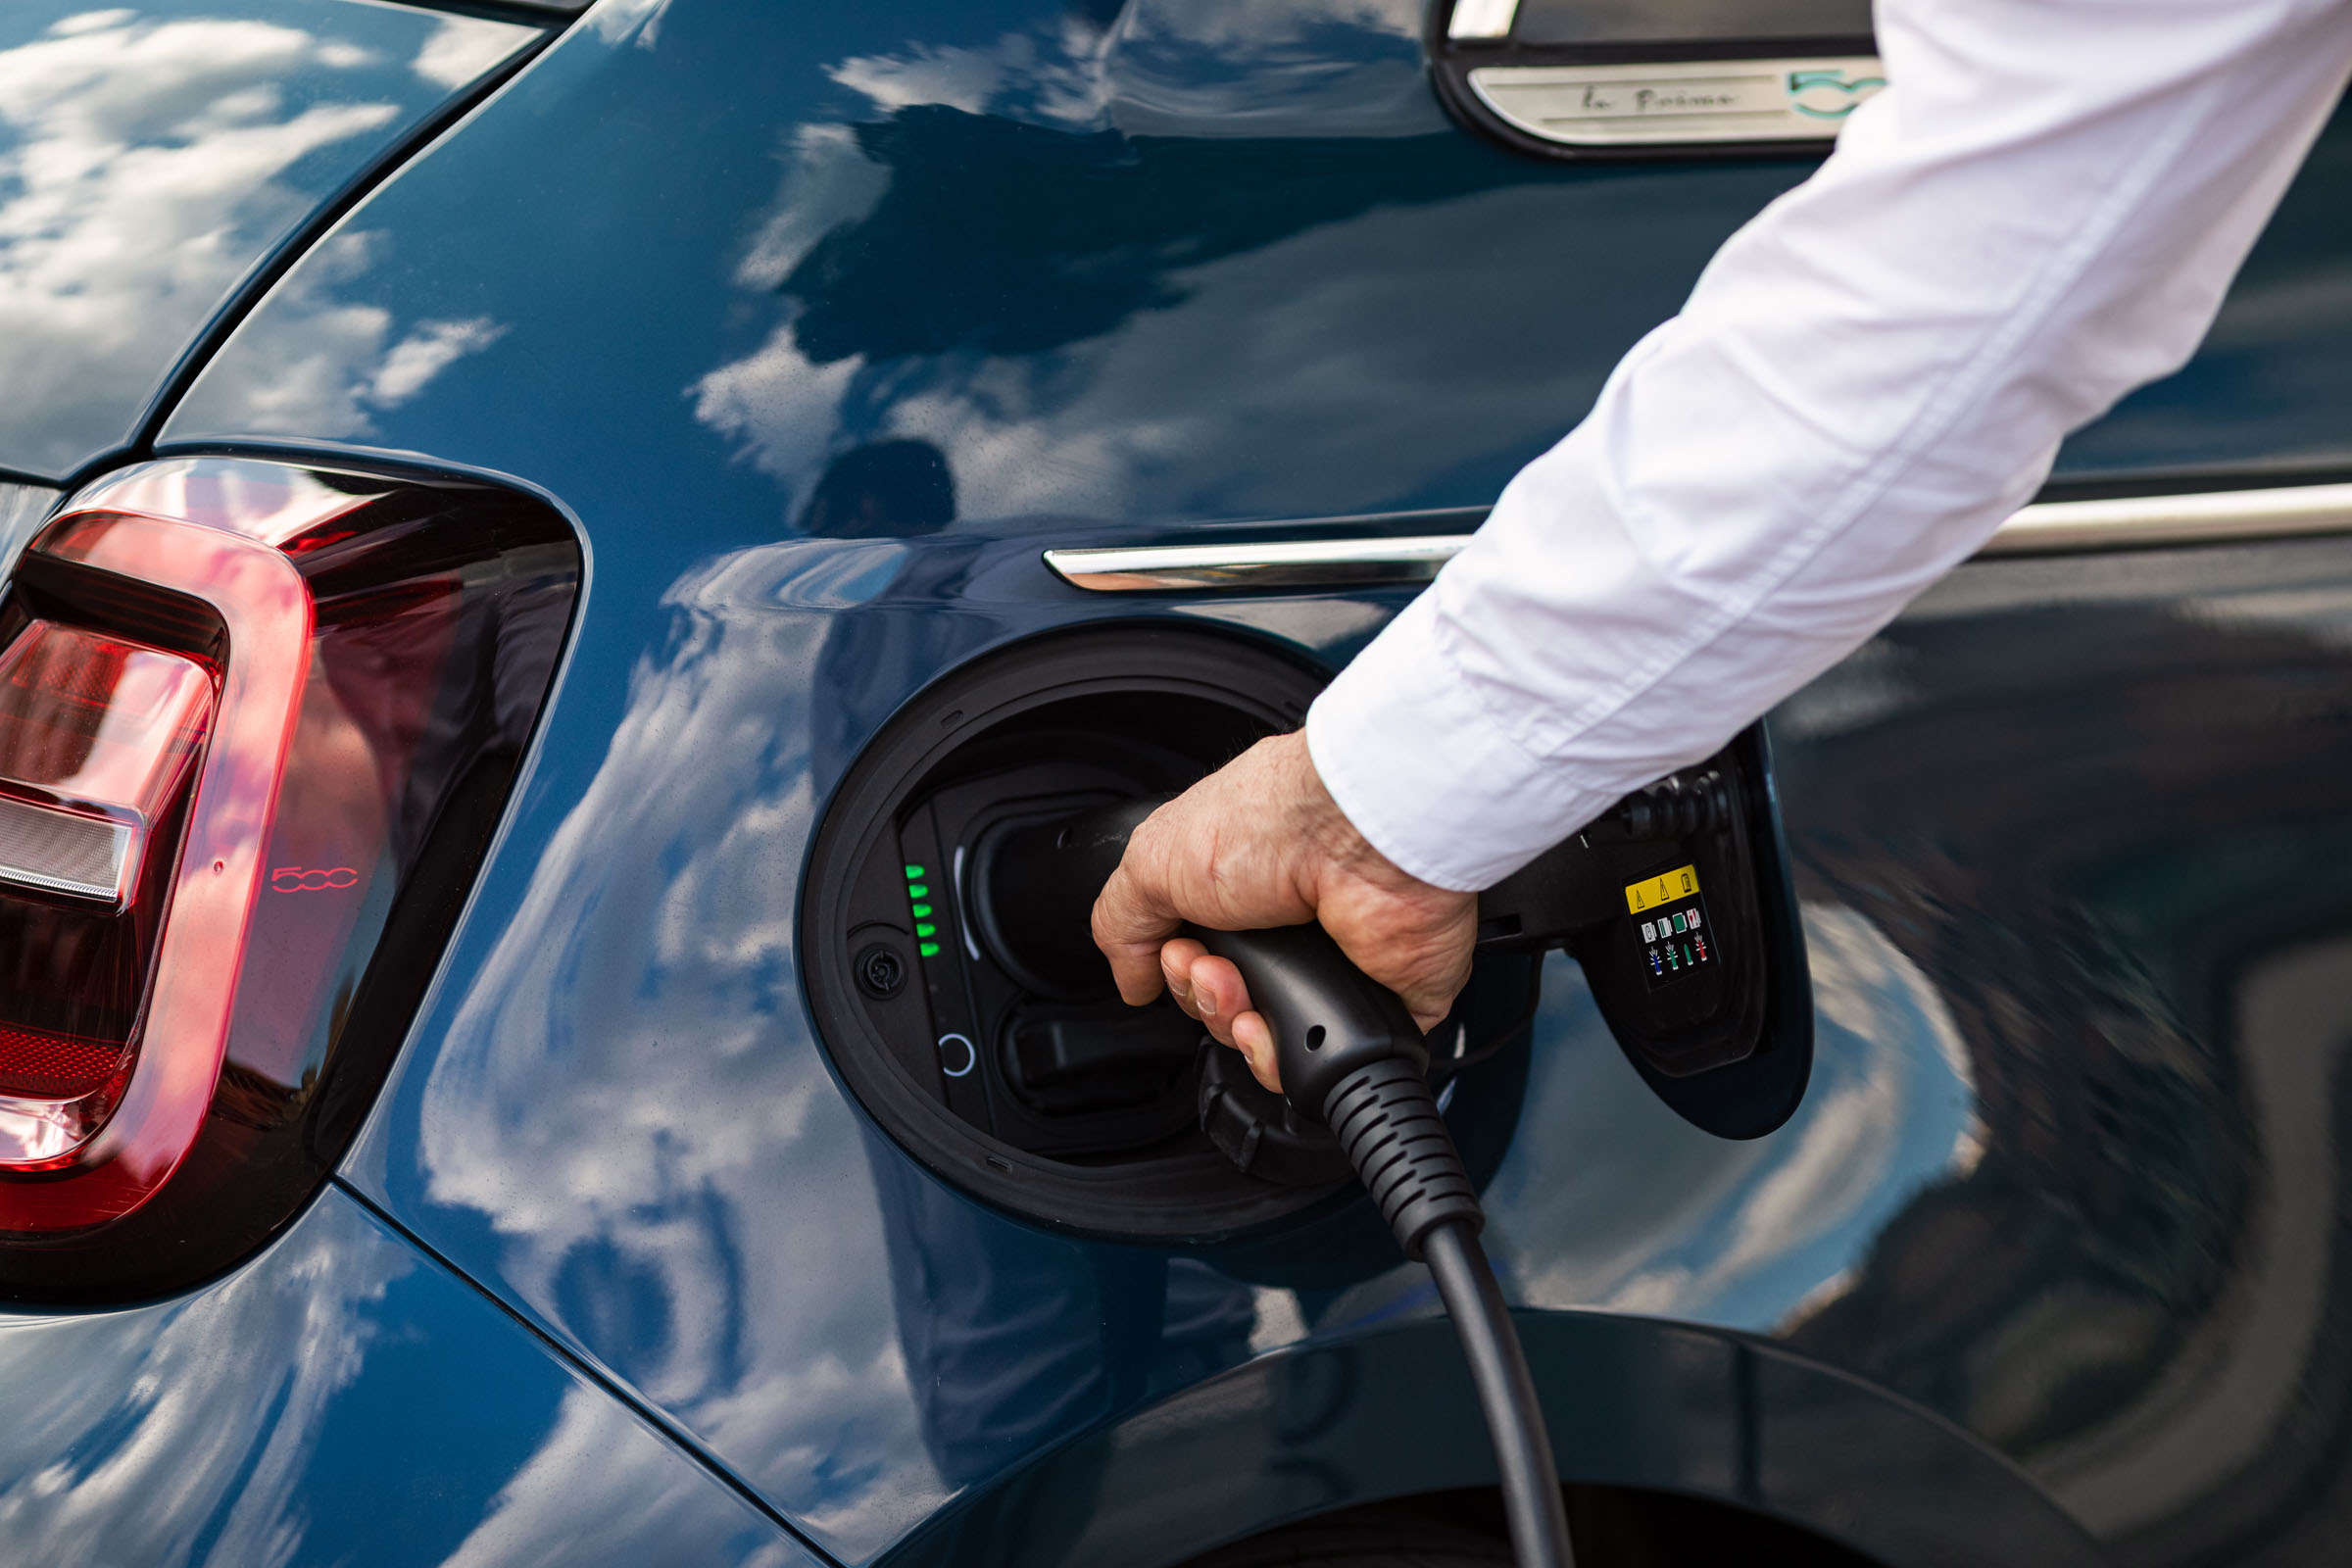 Electric car incentives and subsidies 2020 scrappage scheme ruled out